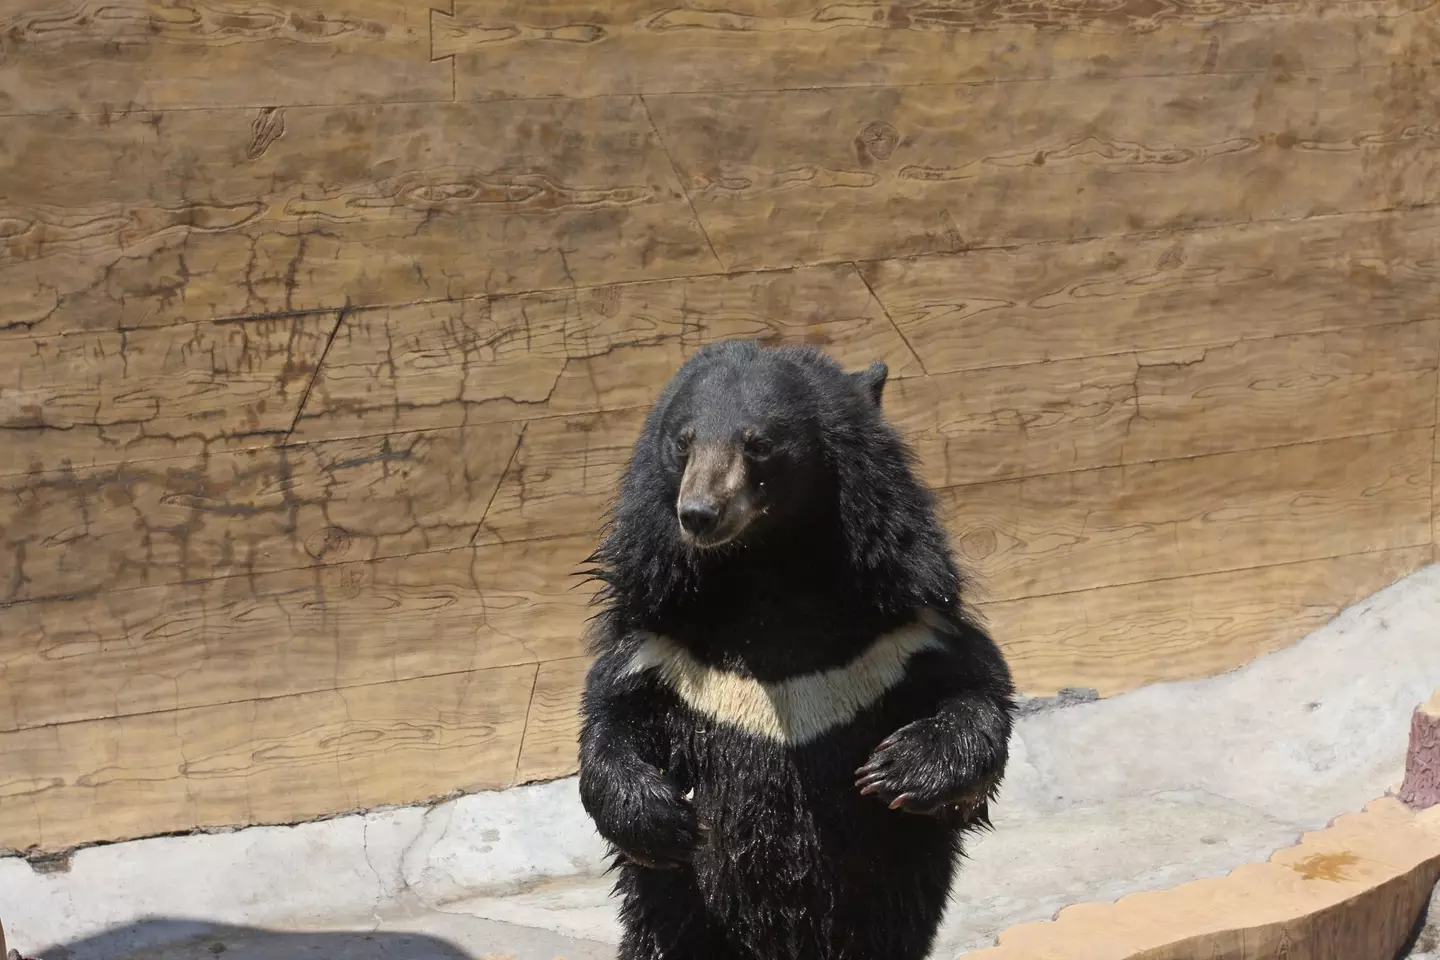 The bear was moved to an animal sanctuary.